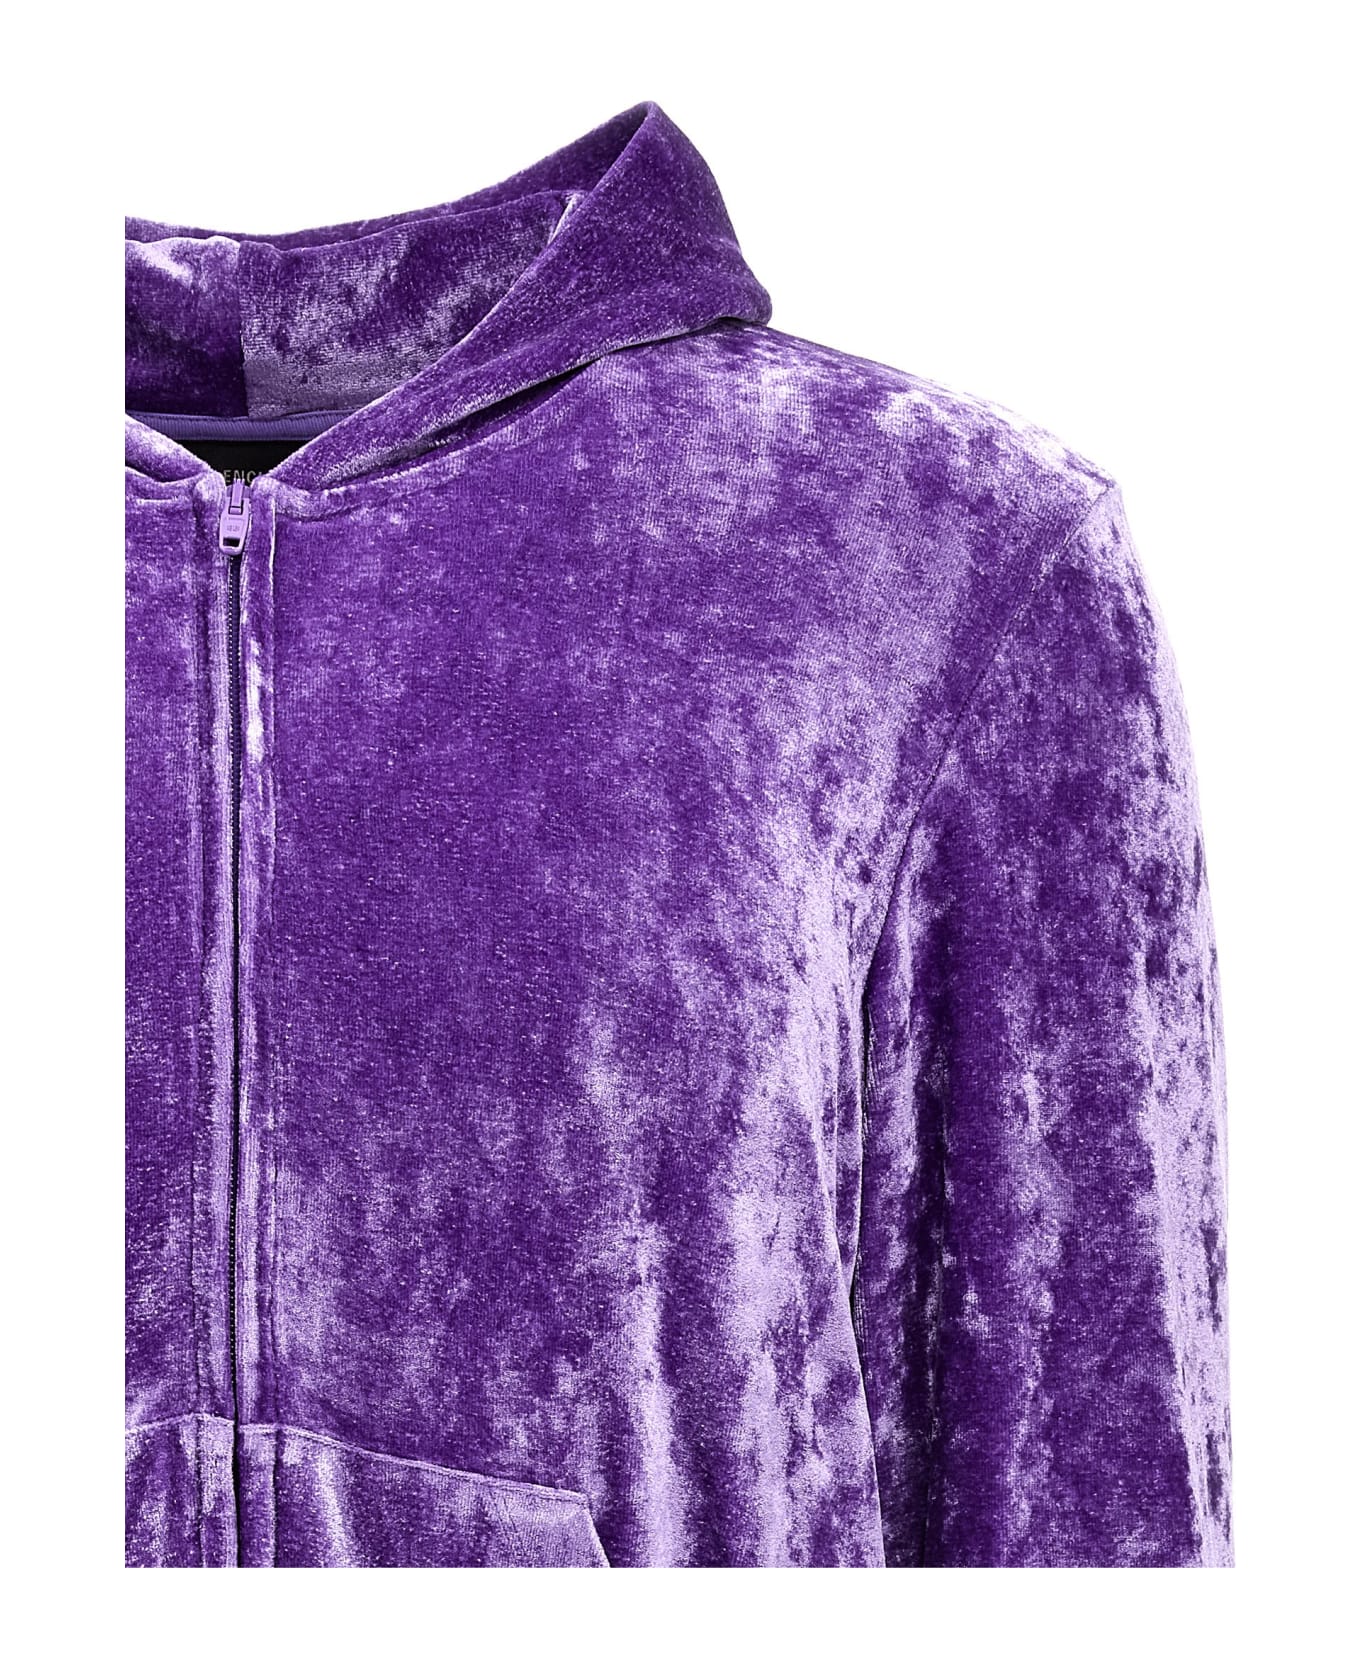 Balenciaga Fitted Zip Up Hoodie - Lilac フリース